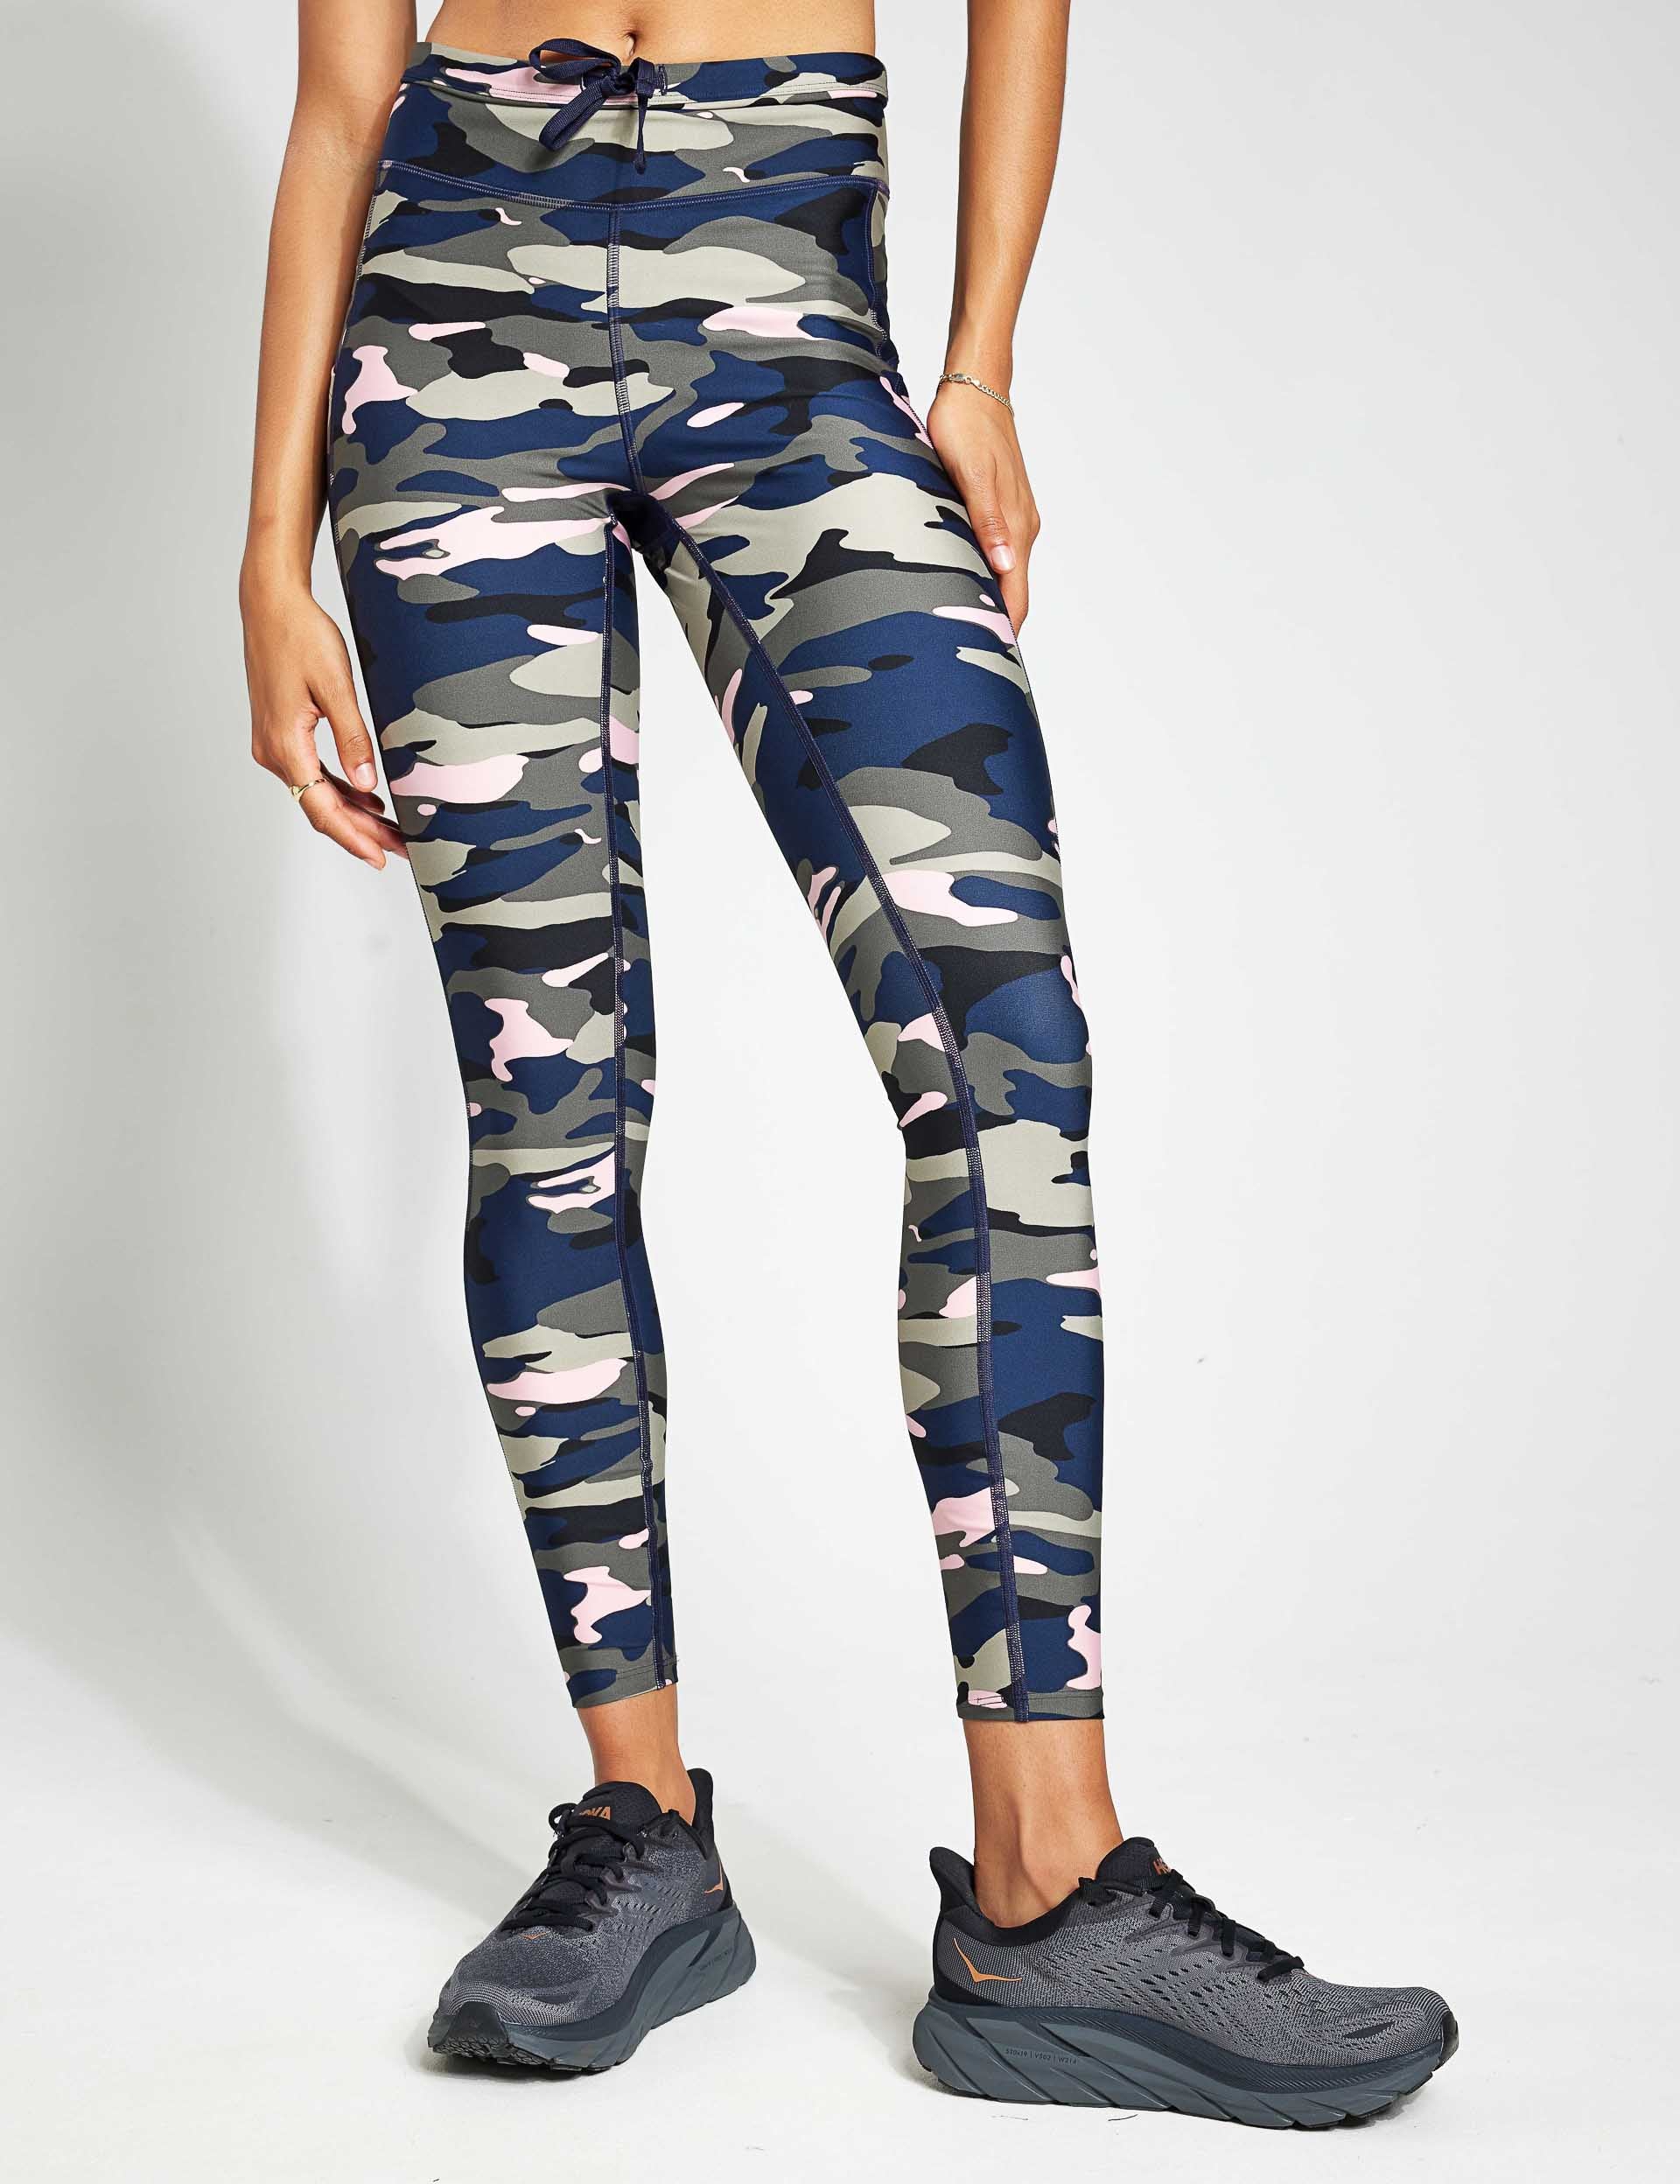 Goodmove | Go Move Printed Gym Leggings - Olive Mix | The Sports Edit